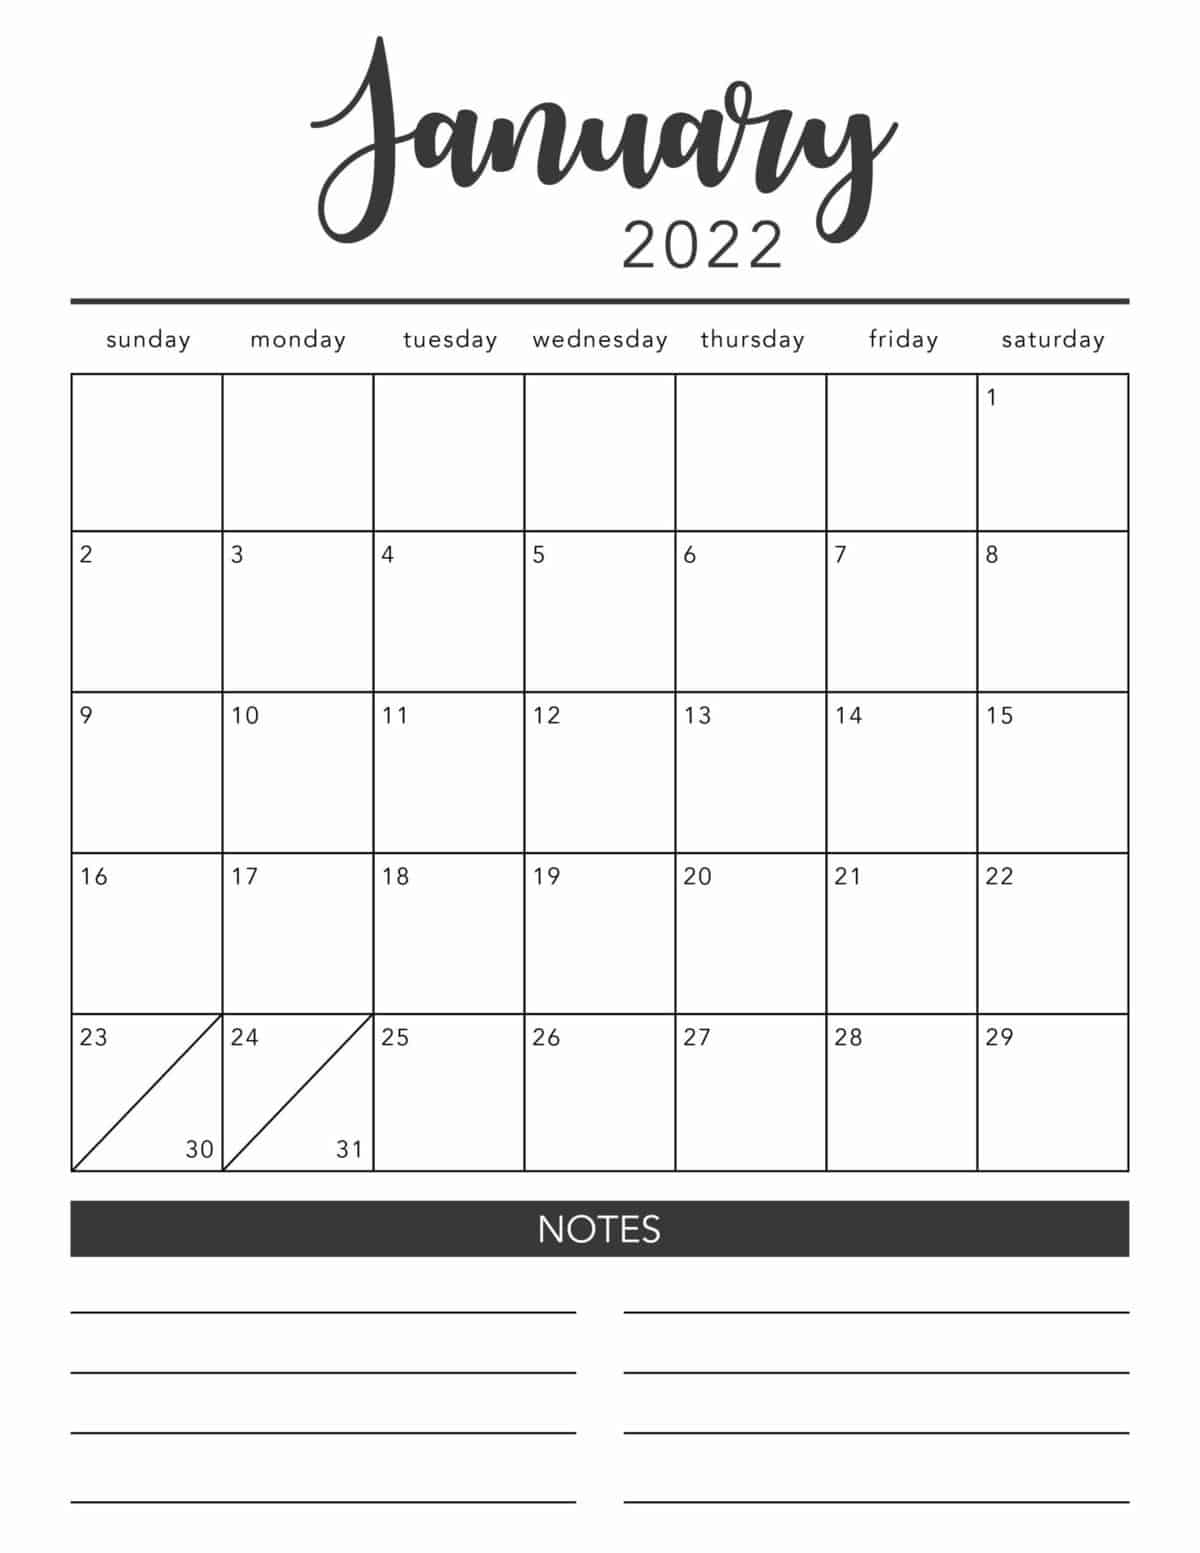 Month By Month 2022 Calendar Free 2022 Printable Calendar Template (2 Colors!) - I Heart Naptime